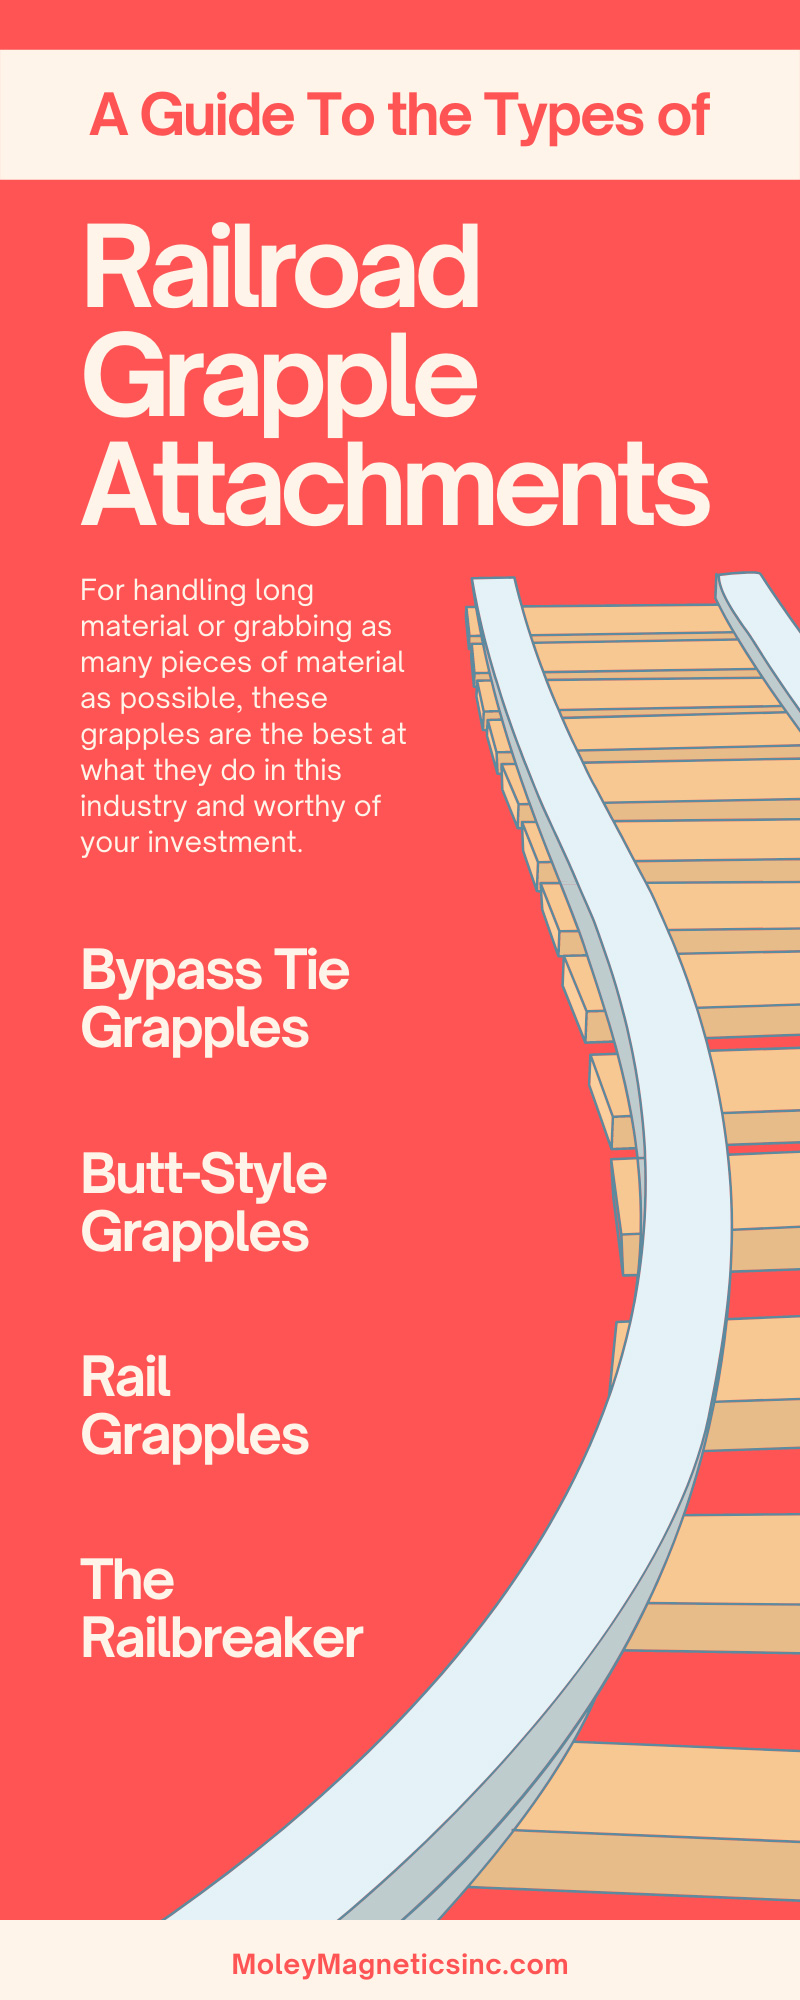 A Guide To the Types of Railroad Grapple Attachments